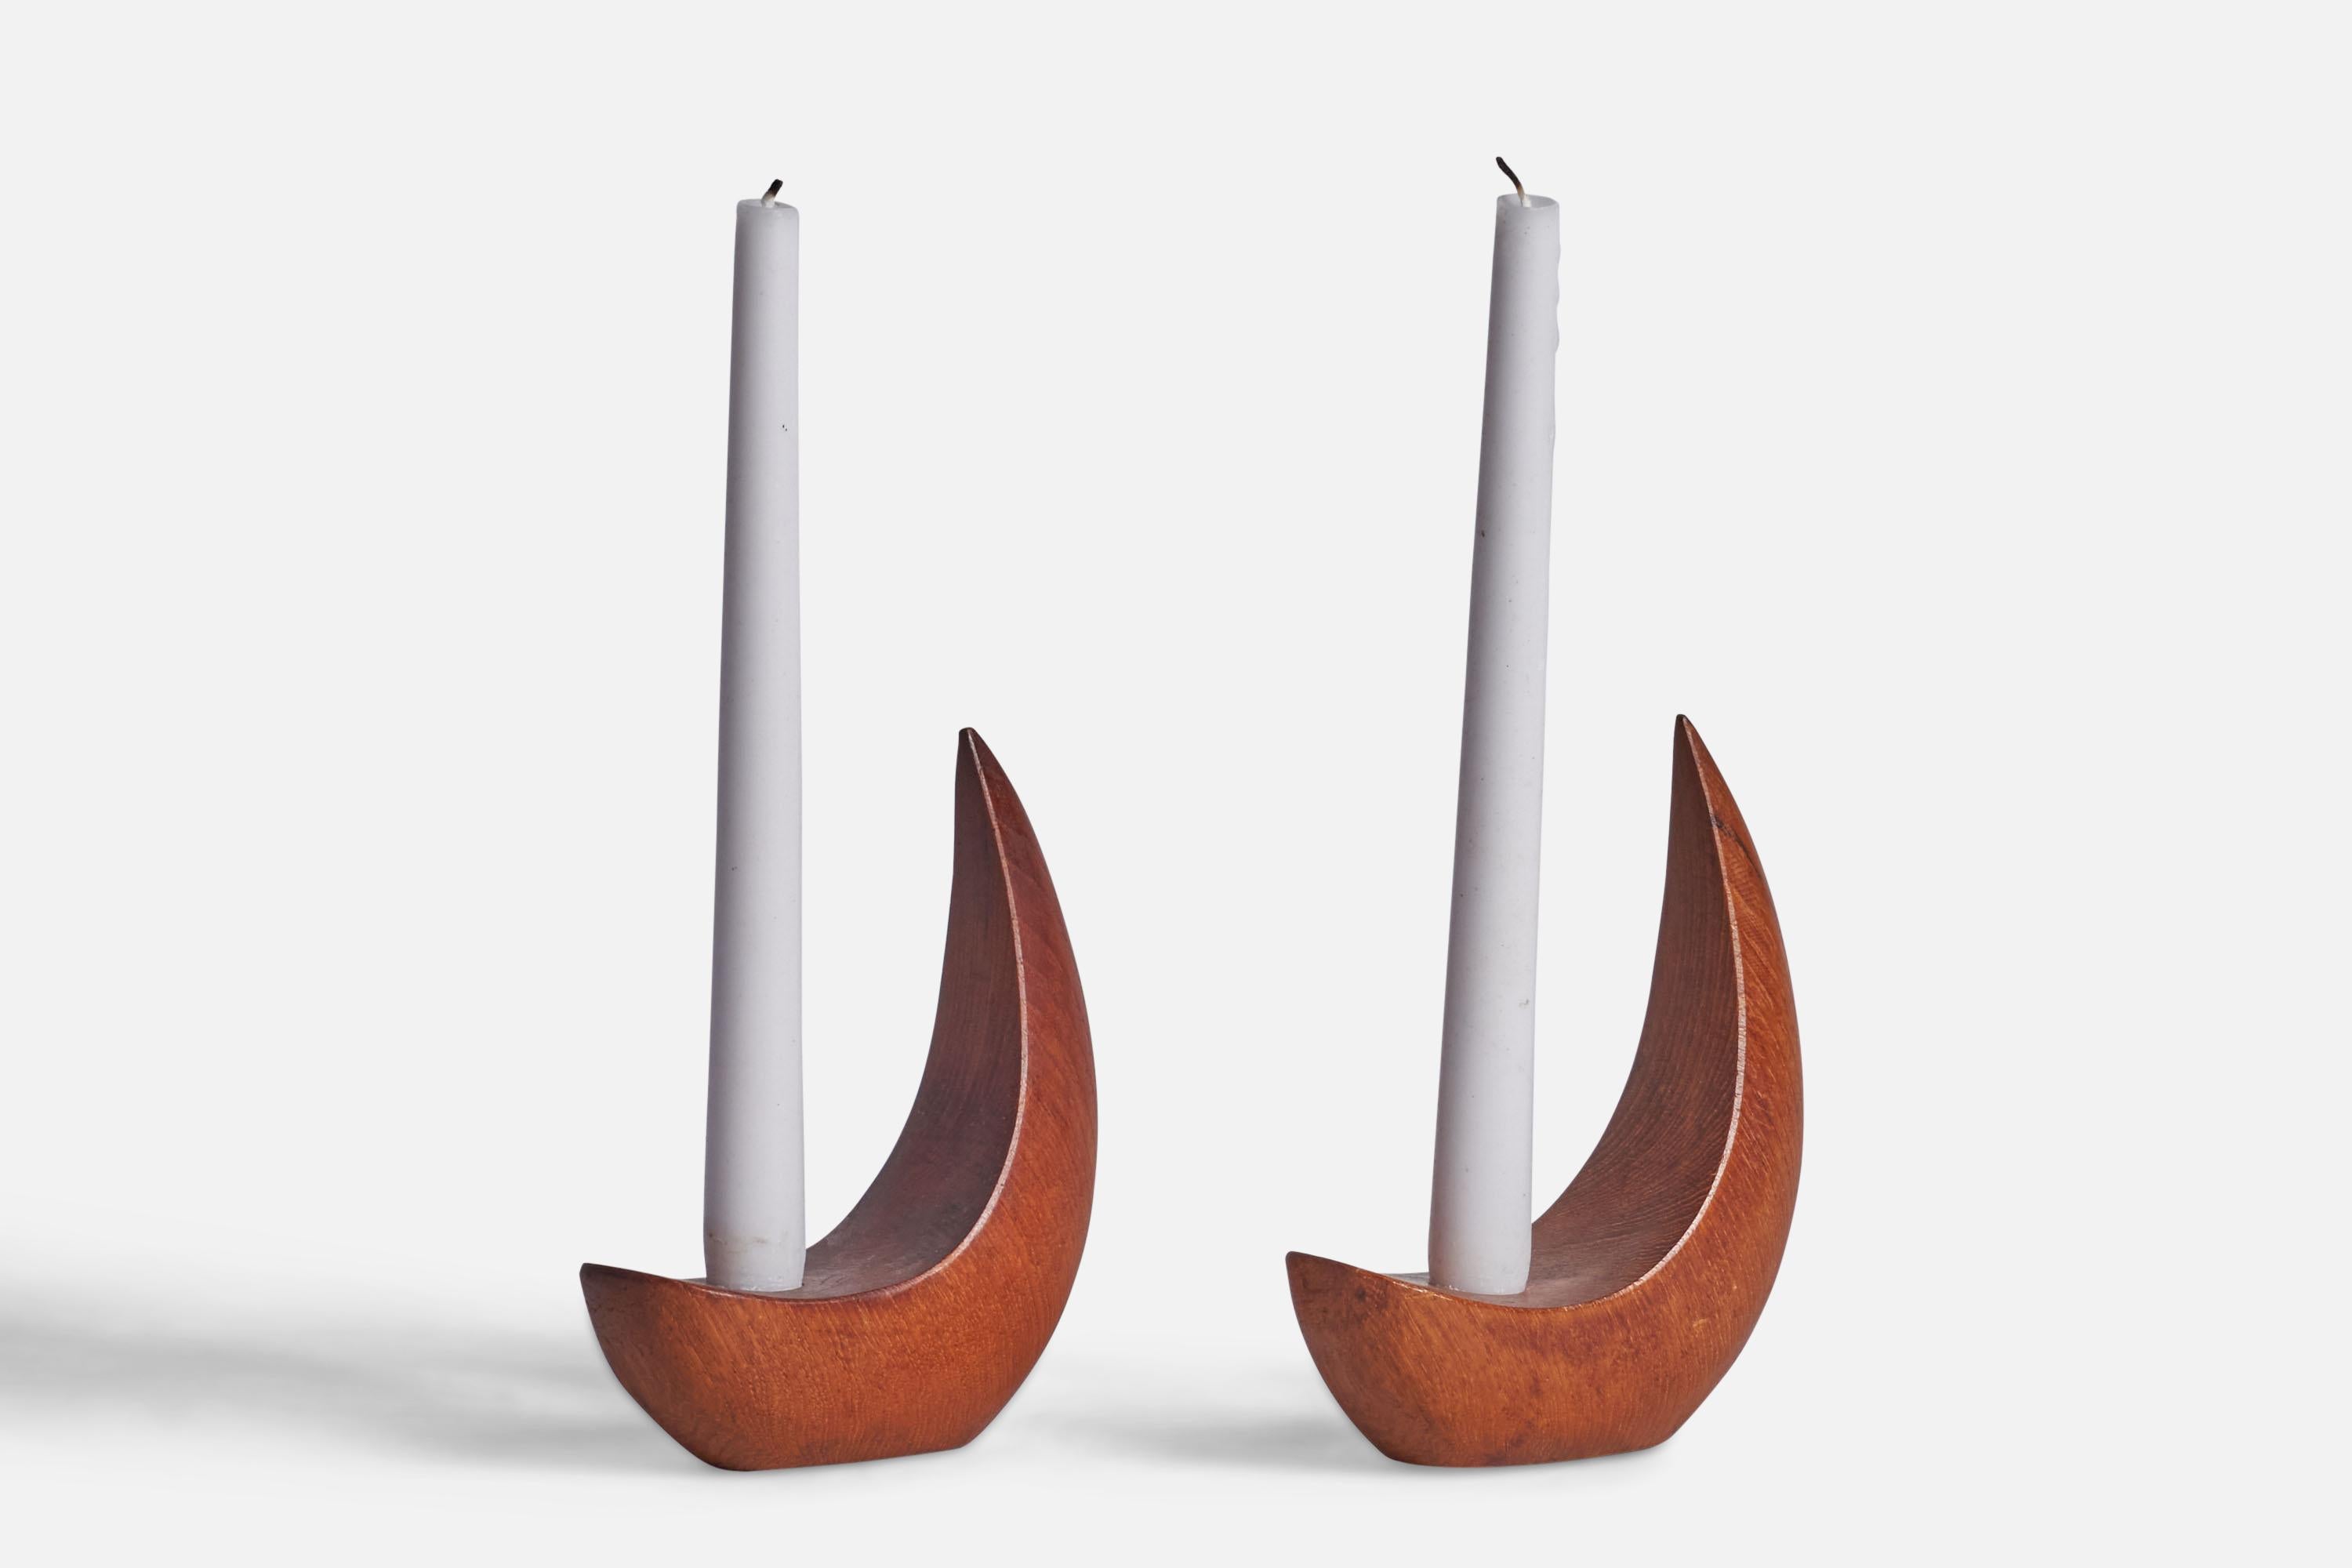 A pair of teak candlesticks designed and produced by Stig Sandqvist, Sweden, c. 1960s.

fits 0.75” diameter candles